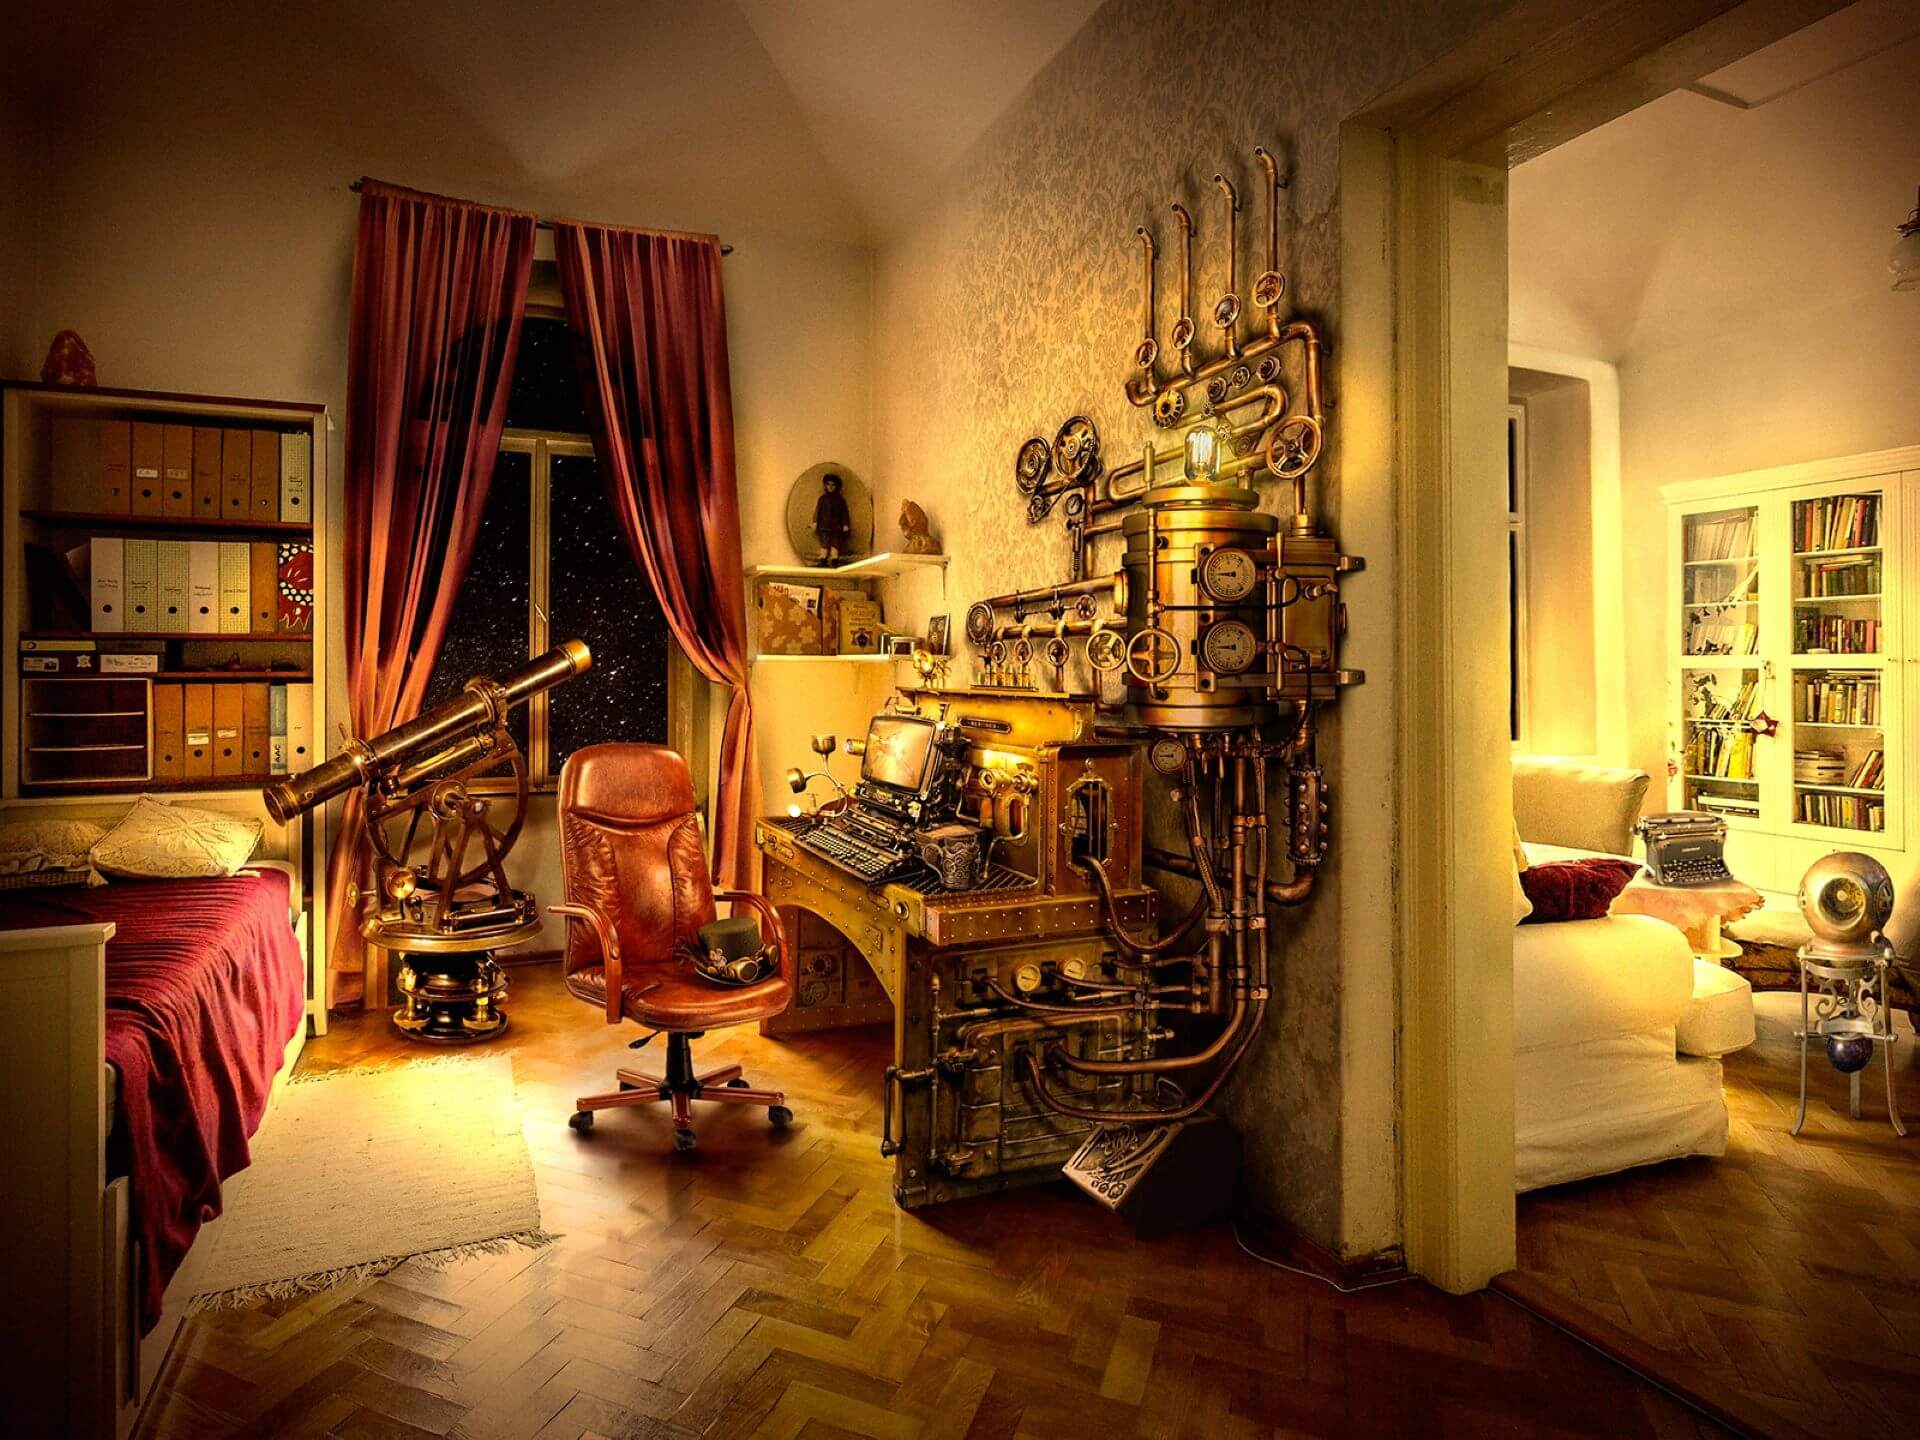 Steampunk Decor - How to decorate your home steampunk style?